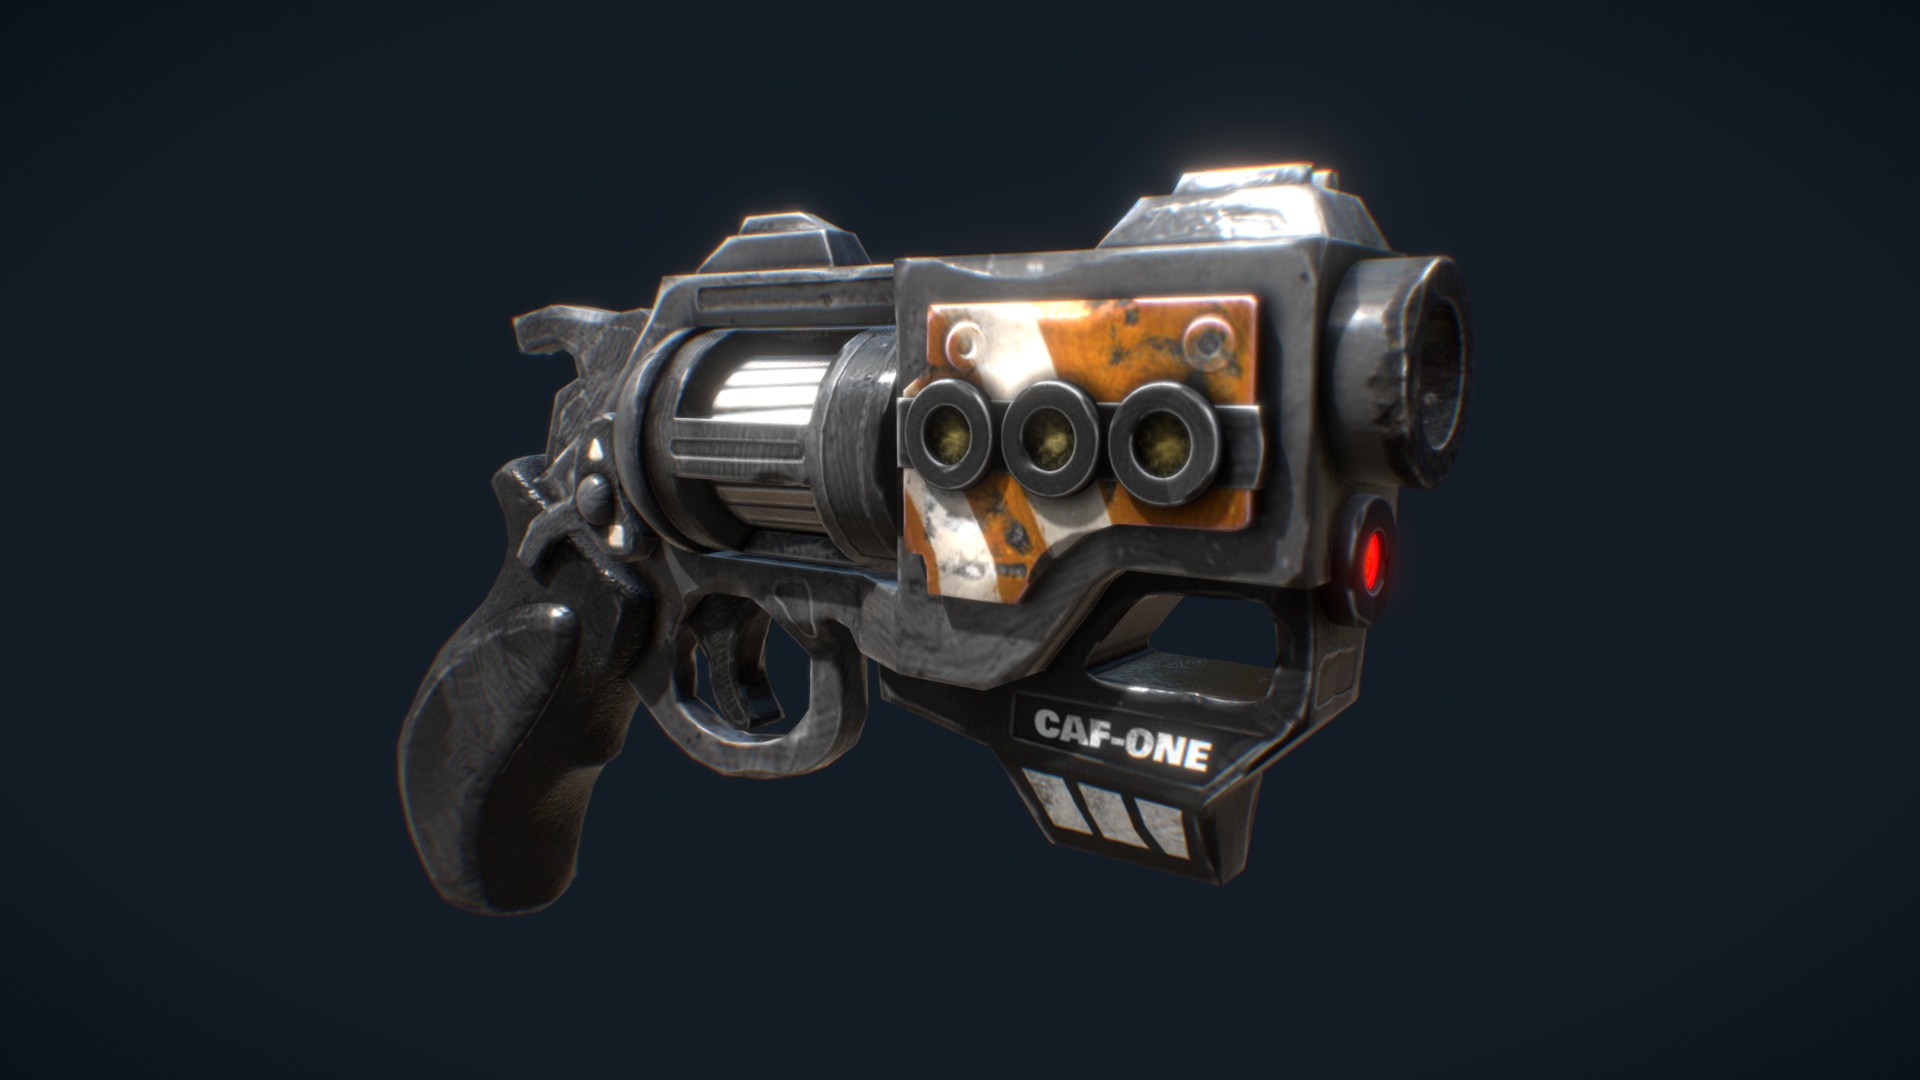 Toon/PBR experiment , Hybrid cartoon revolver
Modelled, sculpt in #blender and textured in Quixel

Behance project with more renders
https://www.behance.net/gallery/63066223/caf-one-gun - CAF-ONE gun - 3D model by Tombolaso 3d model